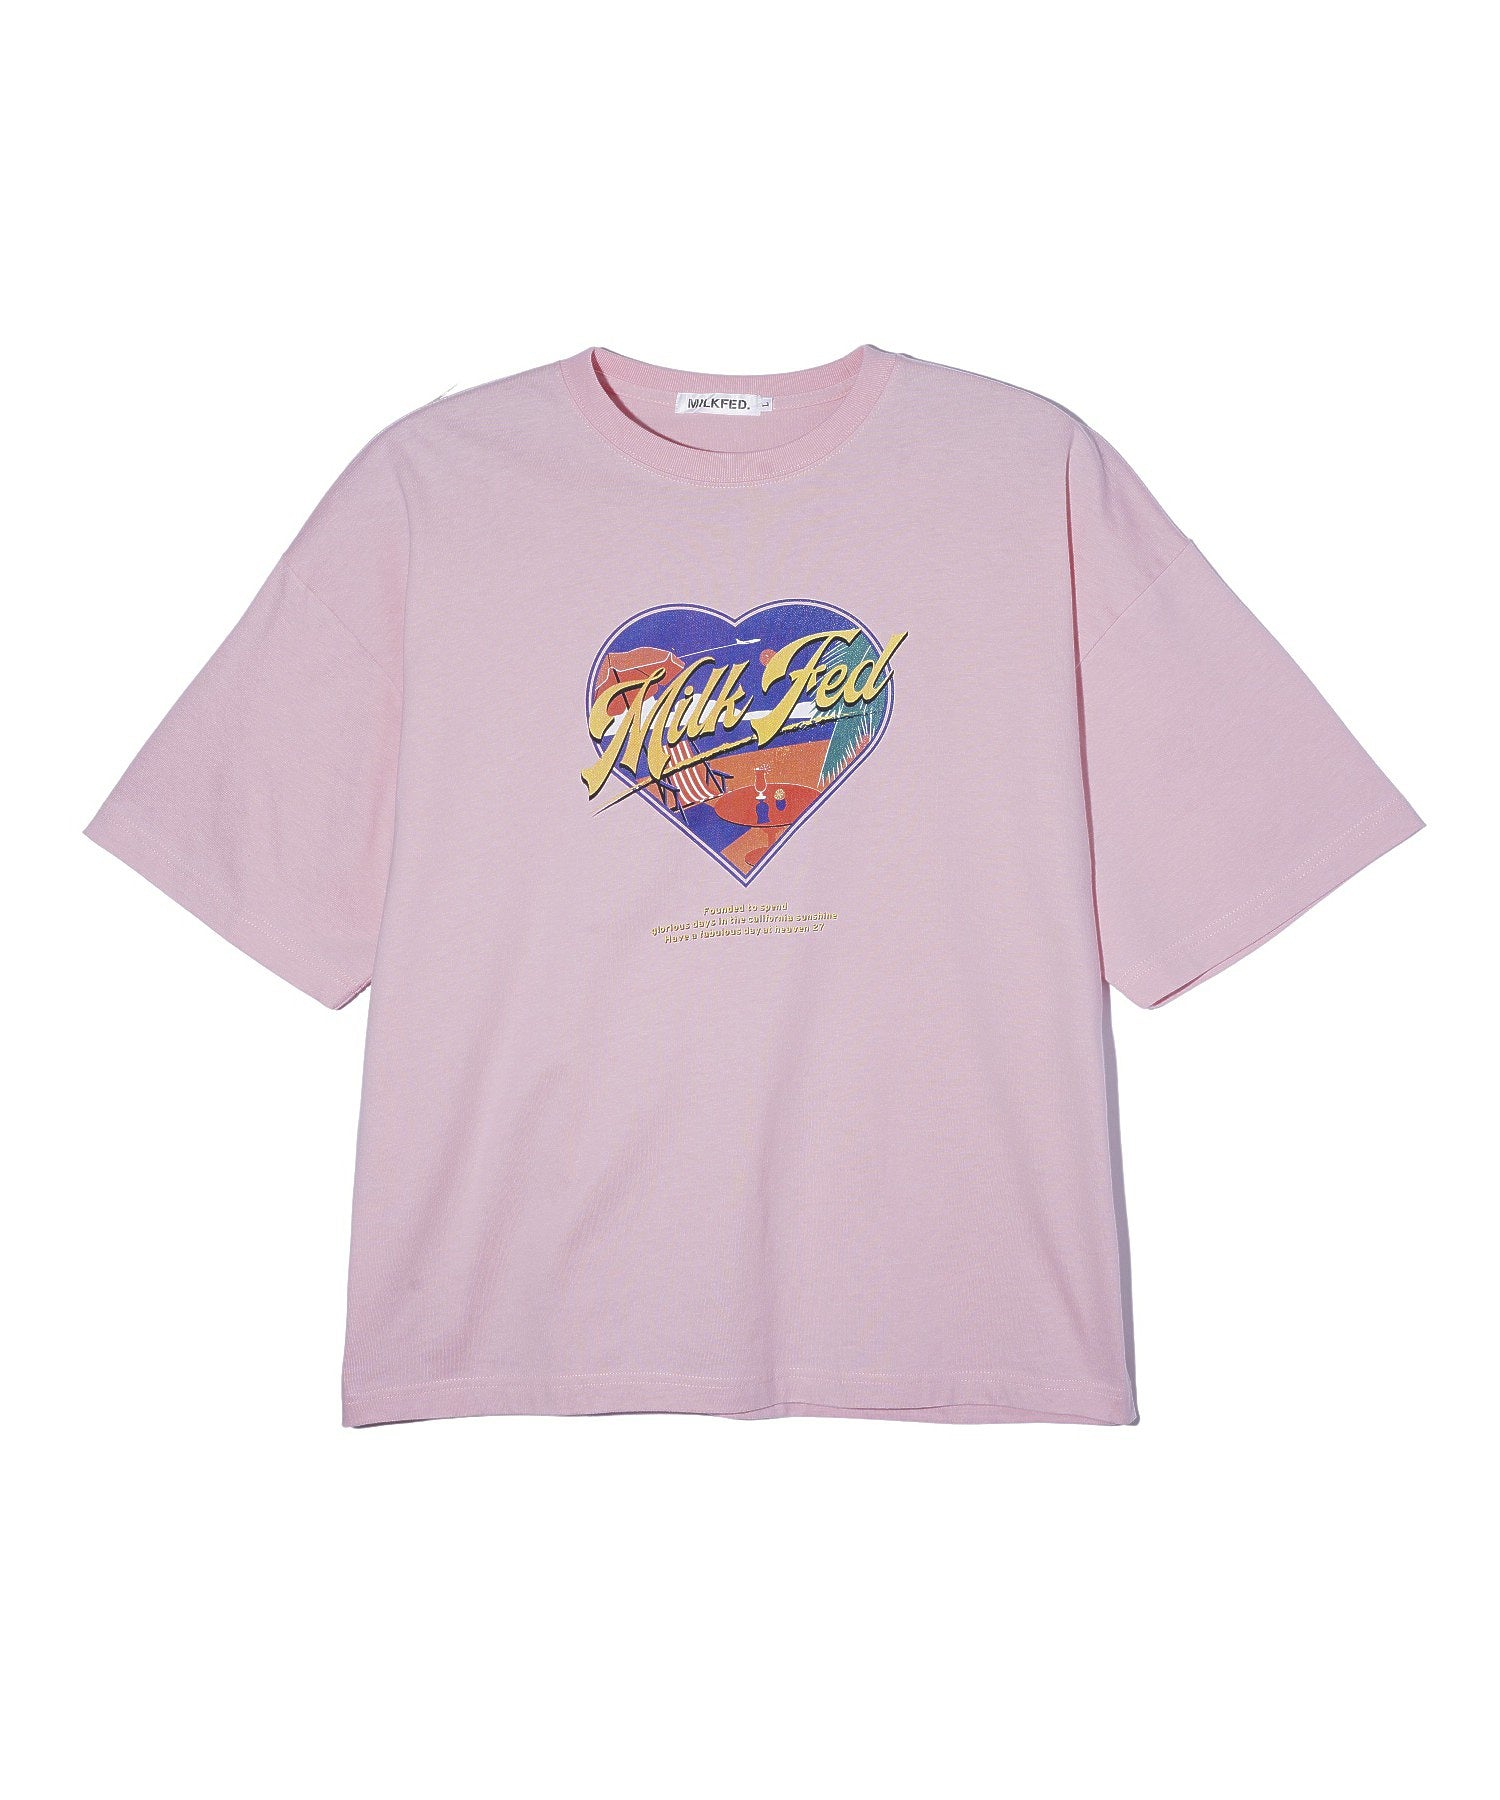 HEART VACATION WIDE S/S TEE